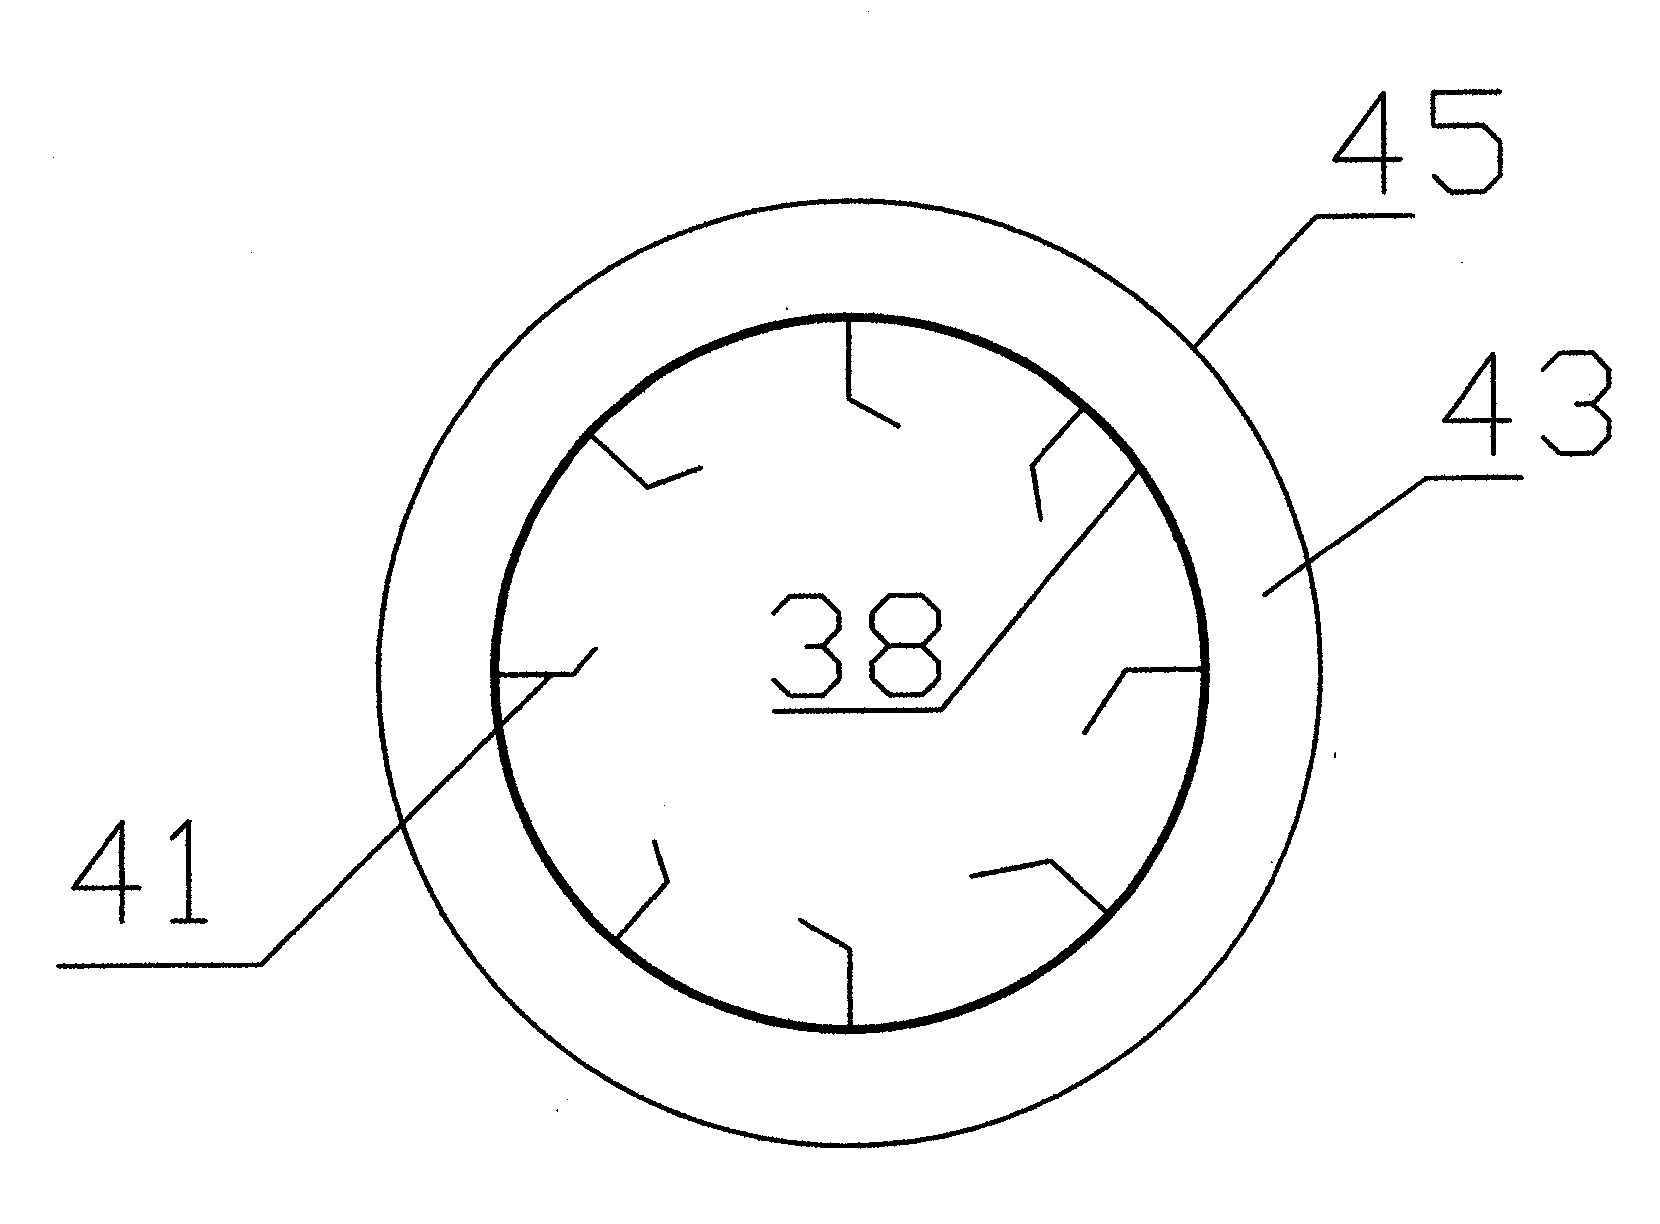 Device for production of fuel oil and fuel gas and/or flue gas power generation through household garbage